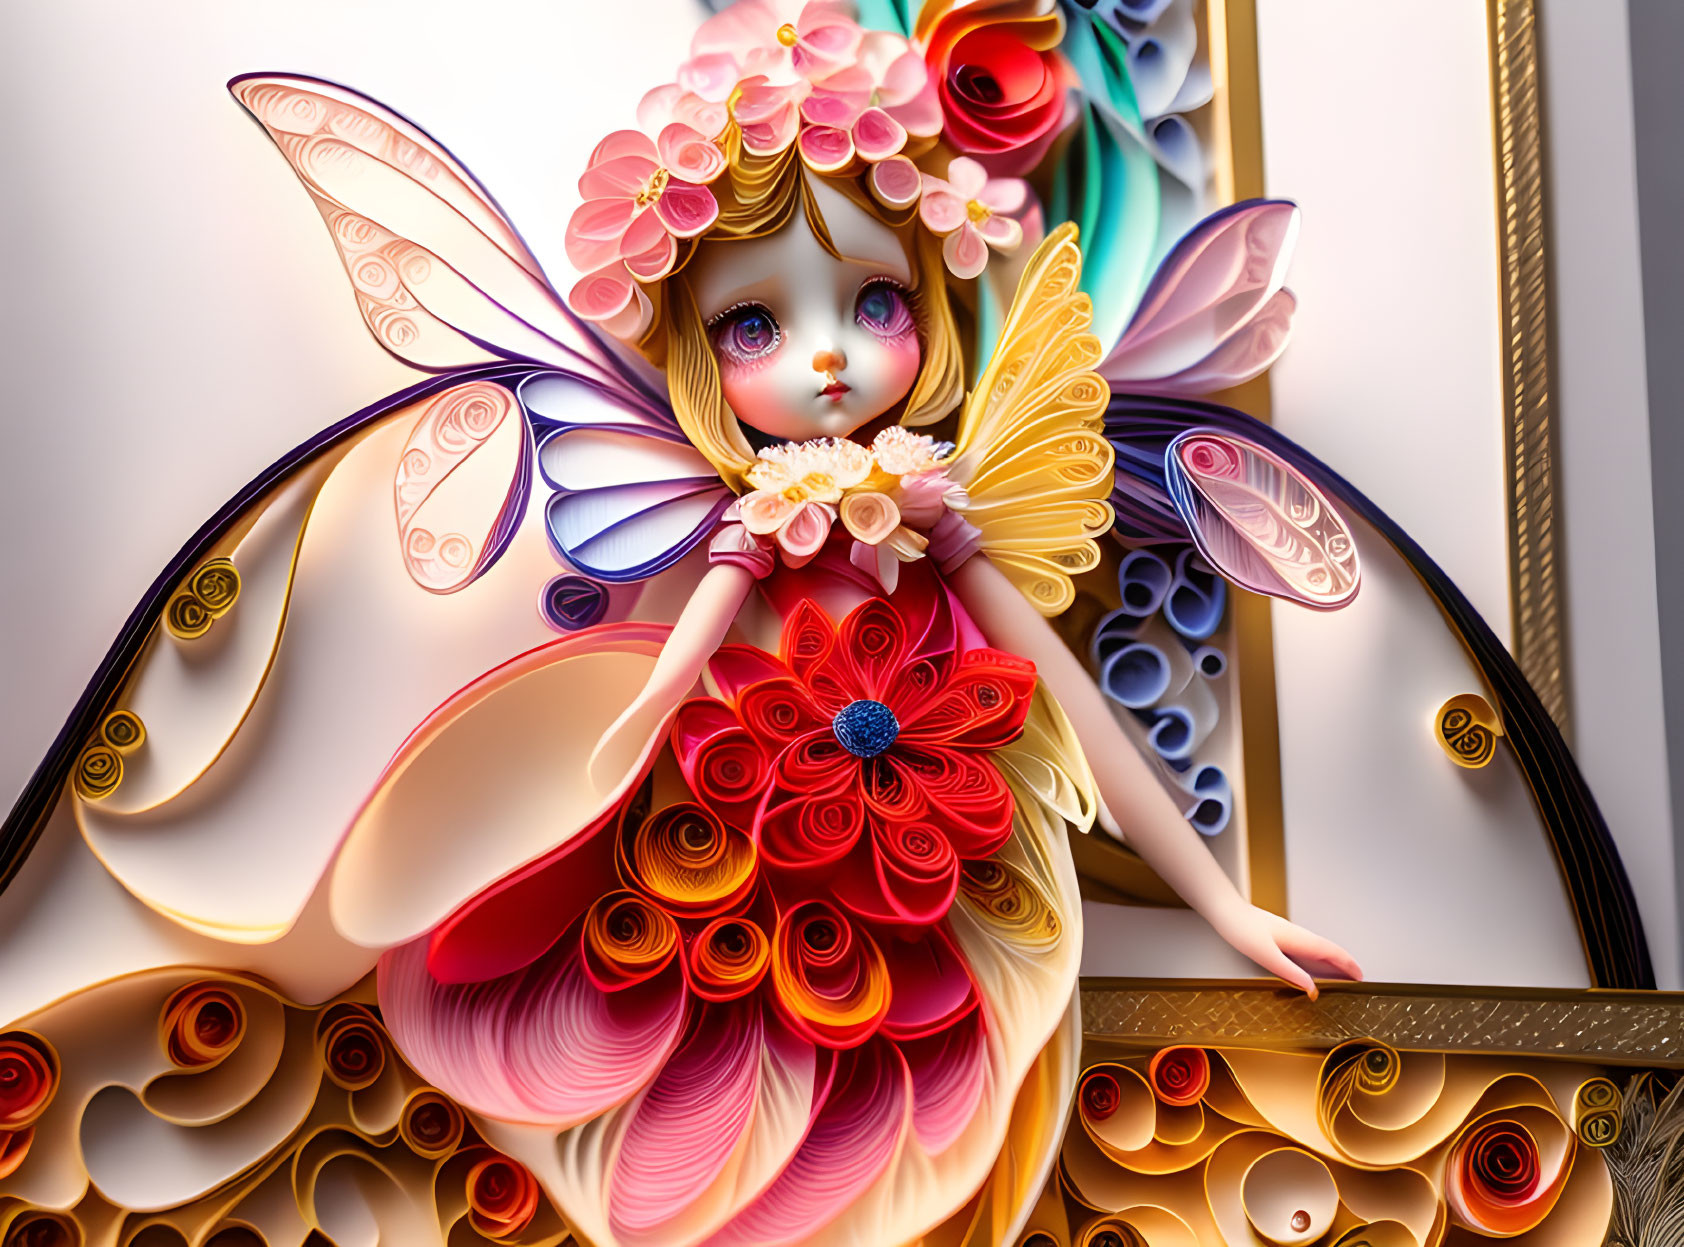 Colorful fairy quilled paper art with intricate wings and floral dress